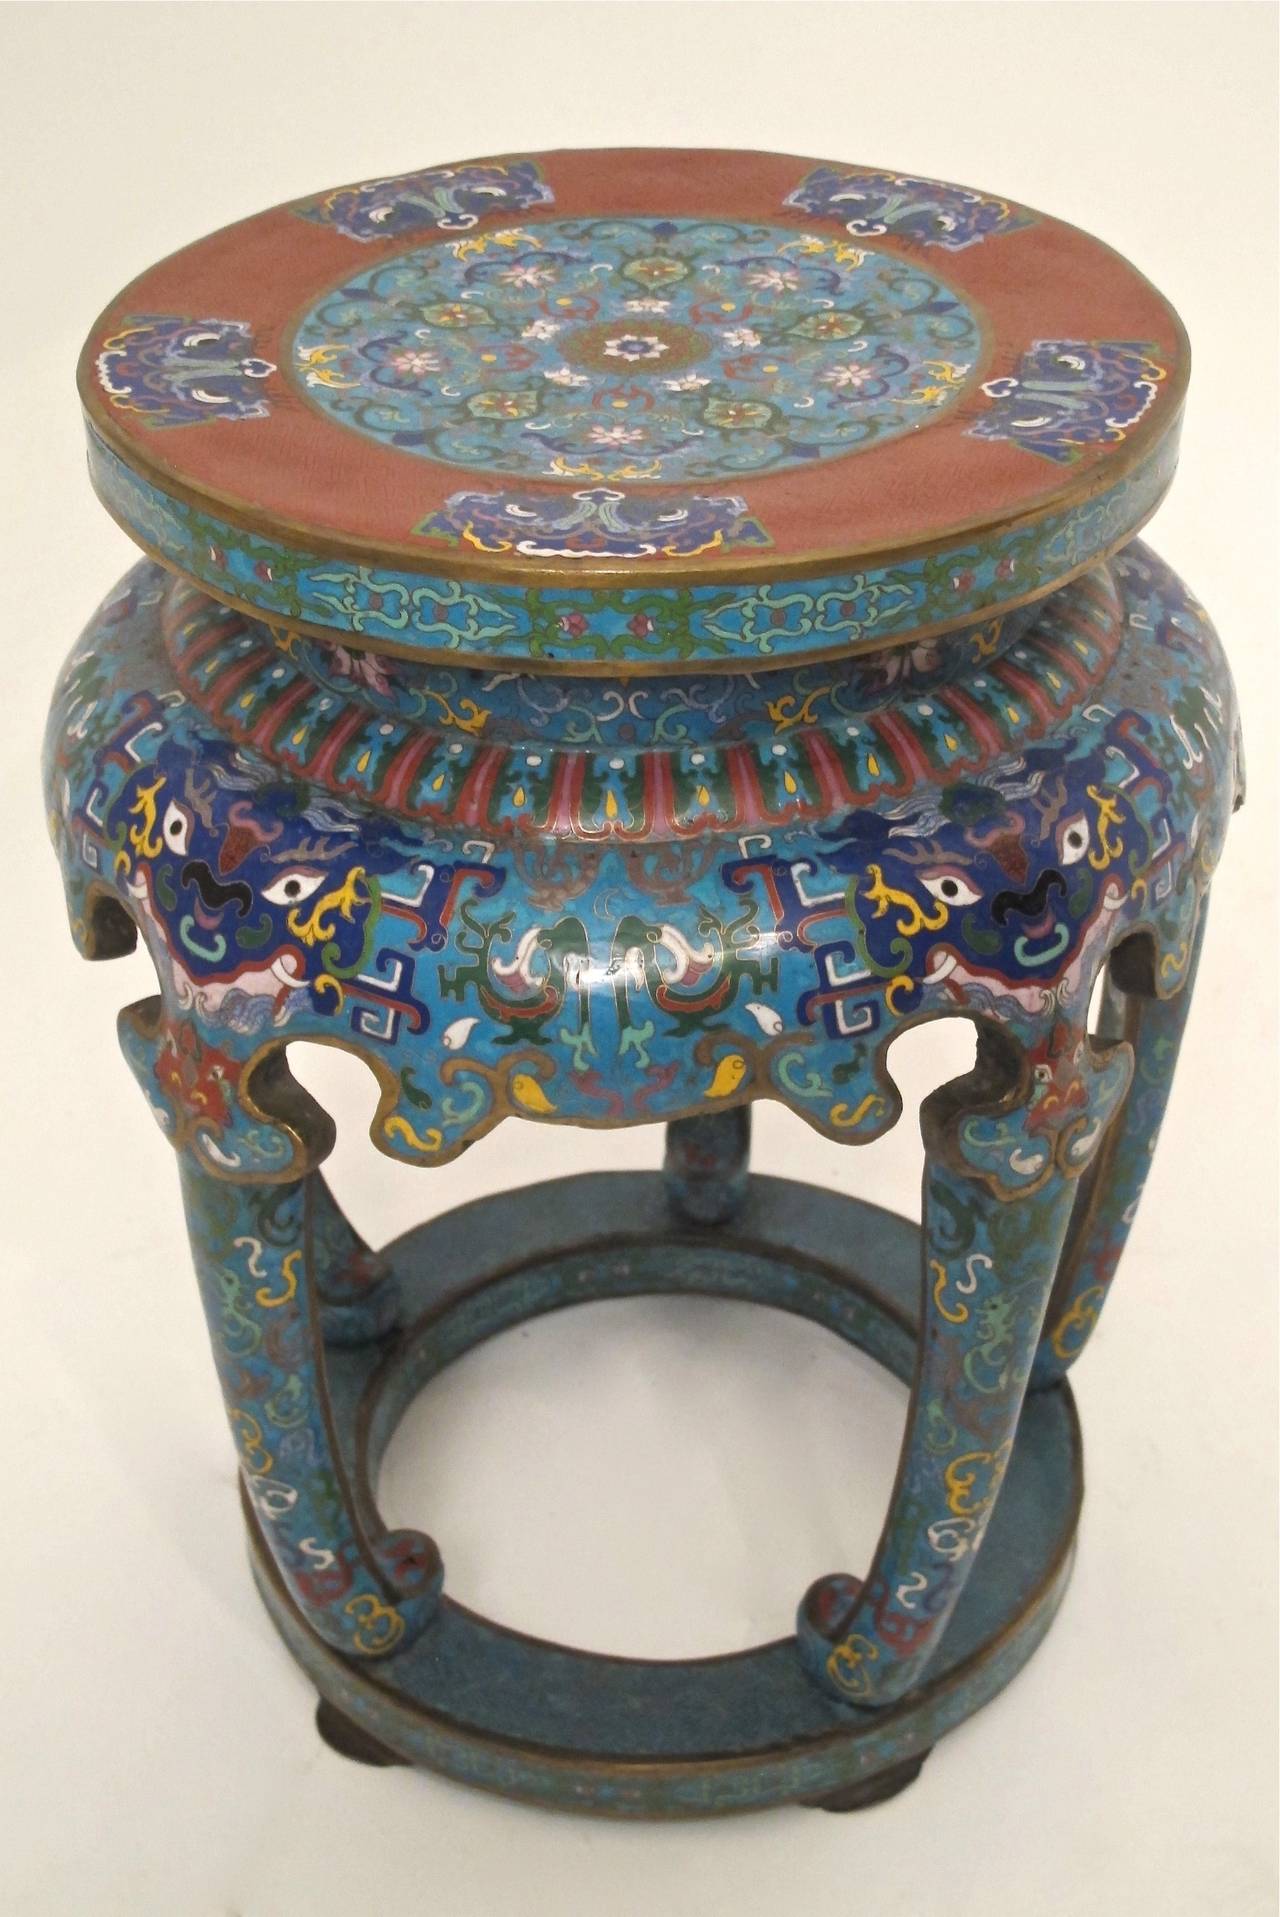 Beautifully detailed cloisonne stool.